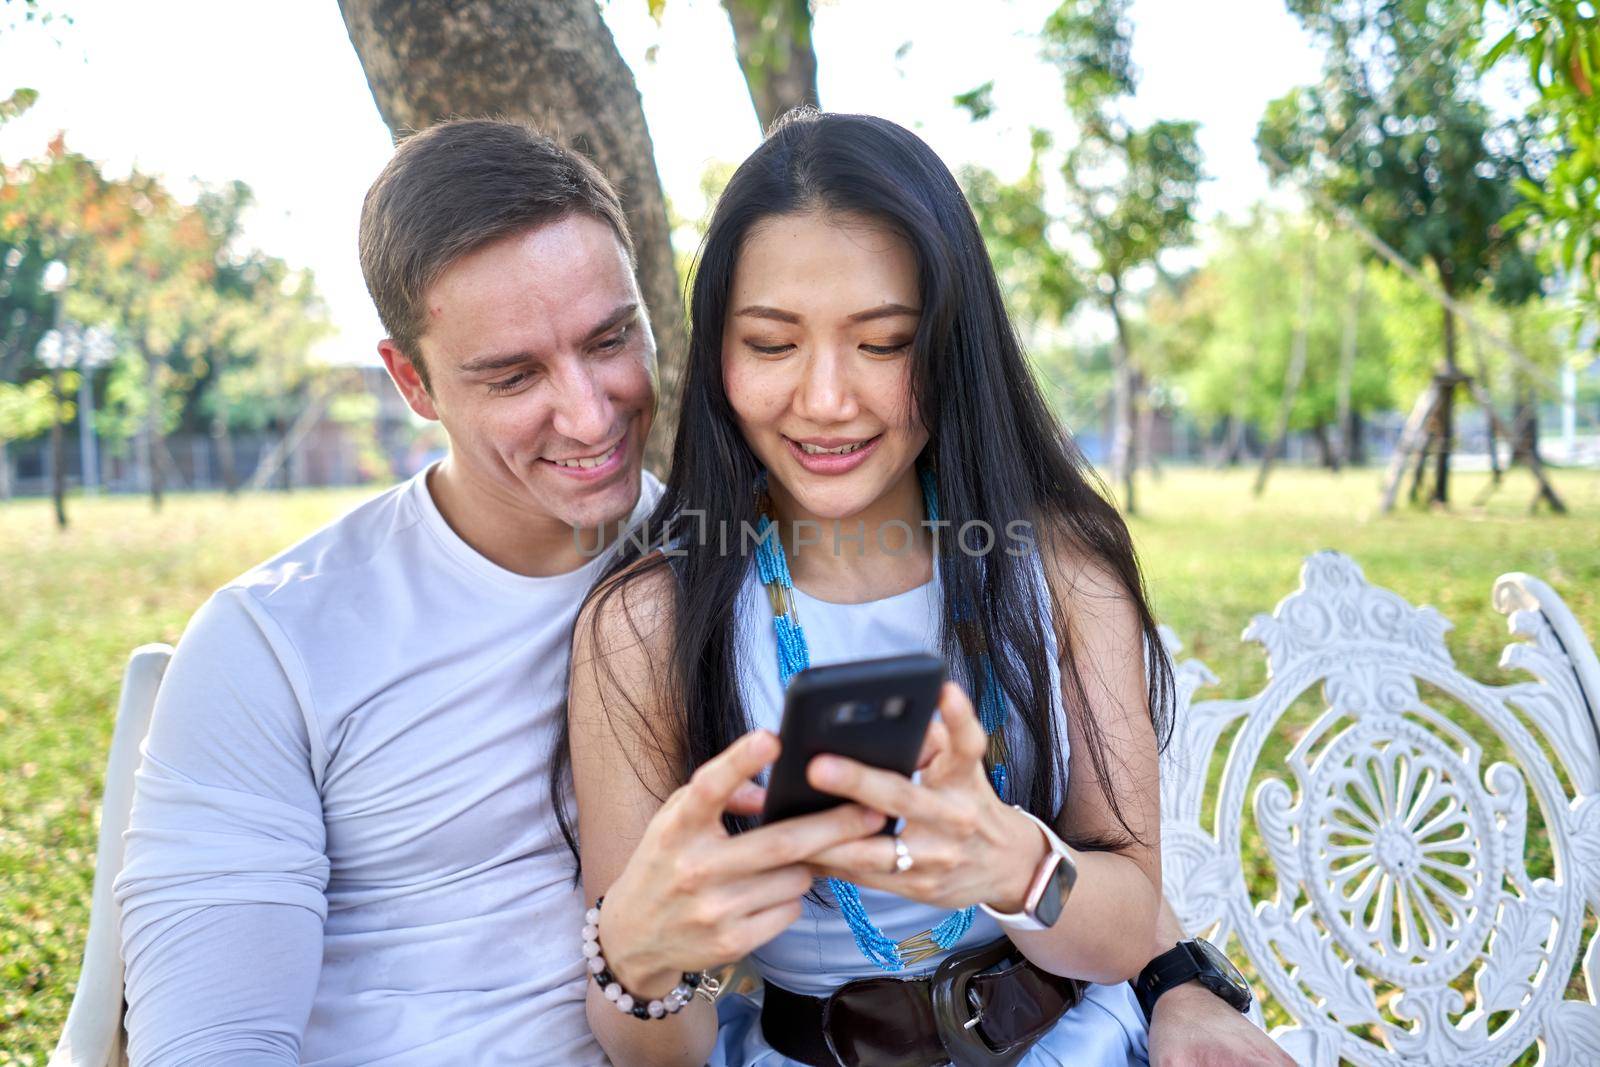 Asian woman showing the screen of the mobile to a man sitting together on a bench in a park